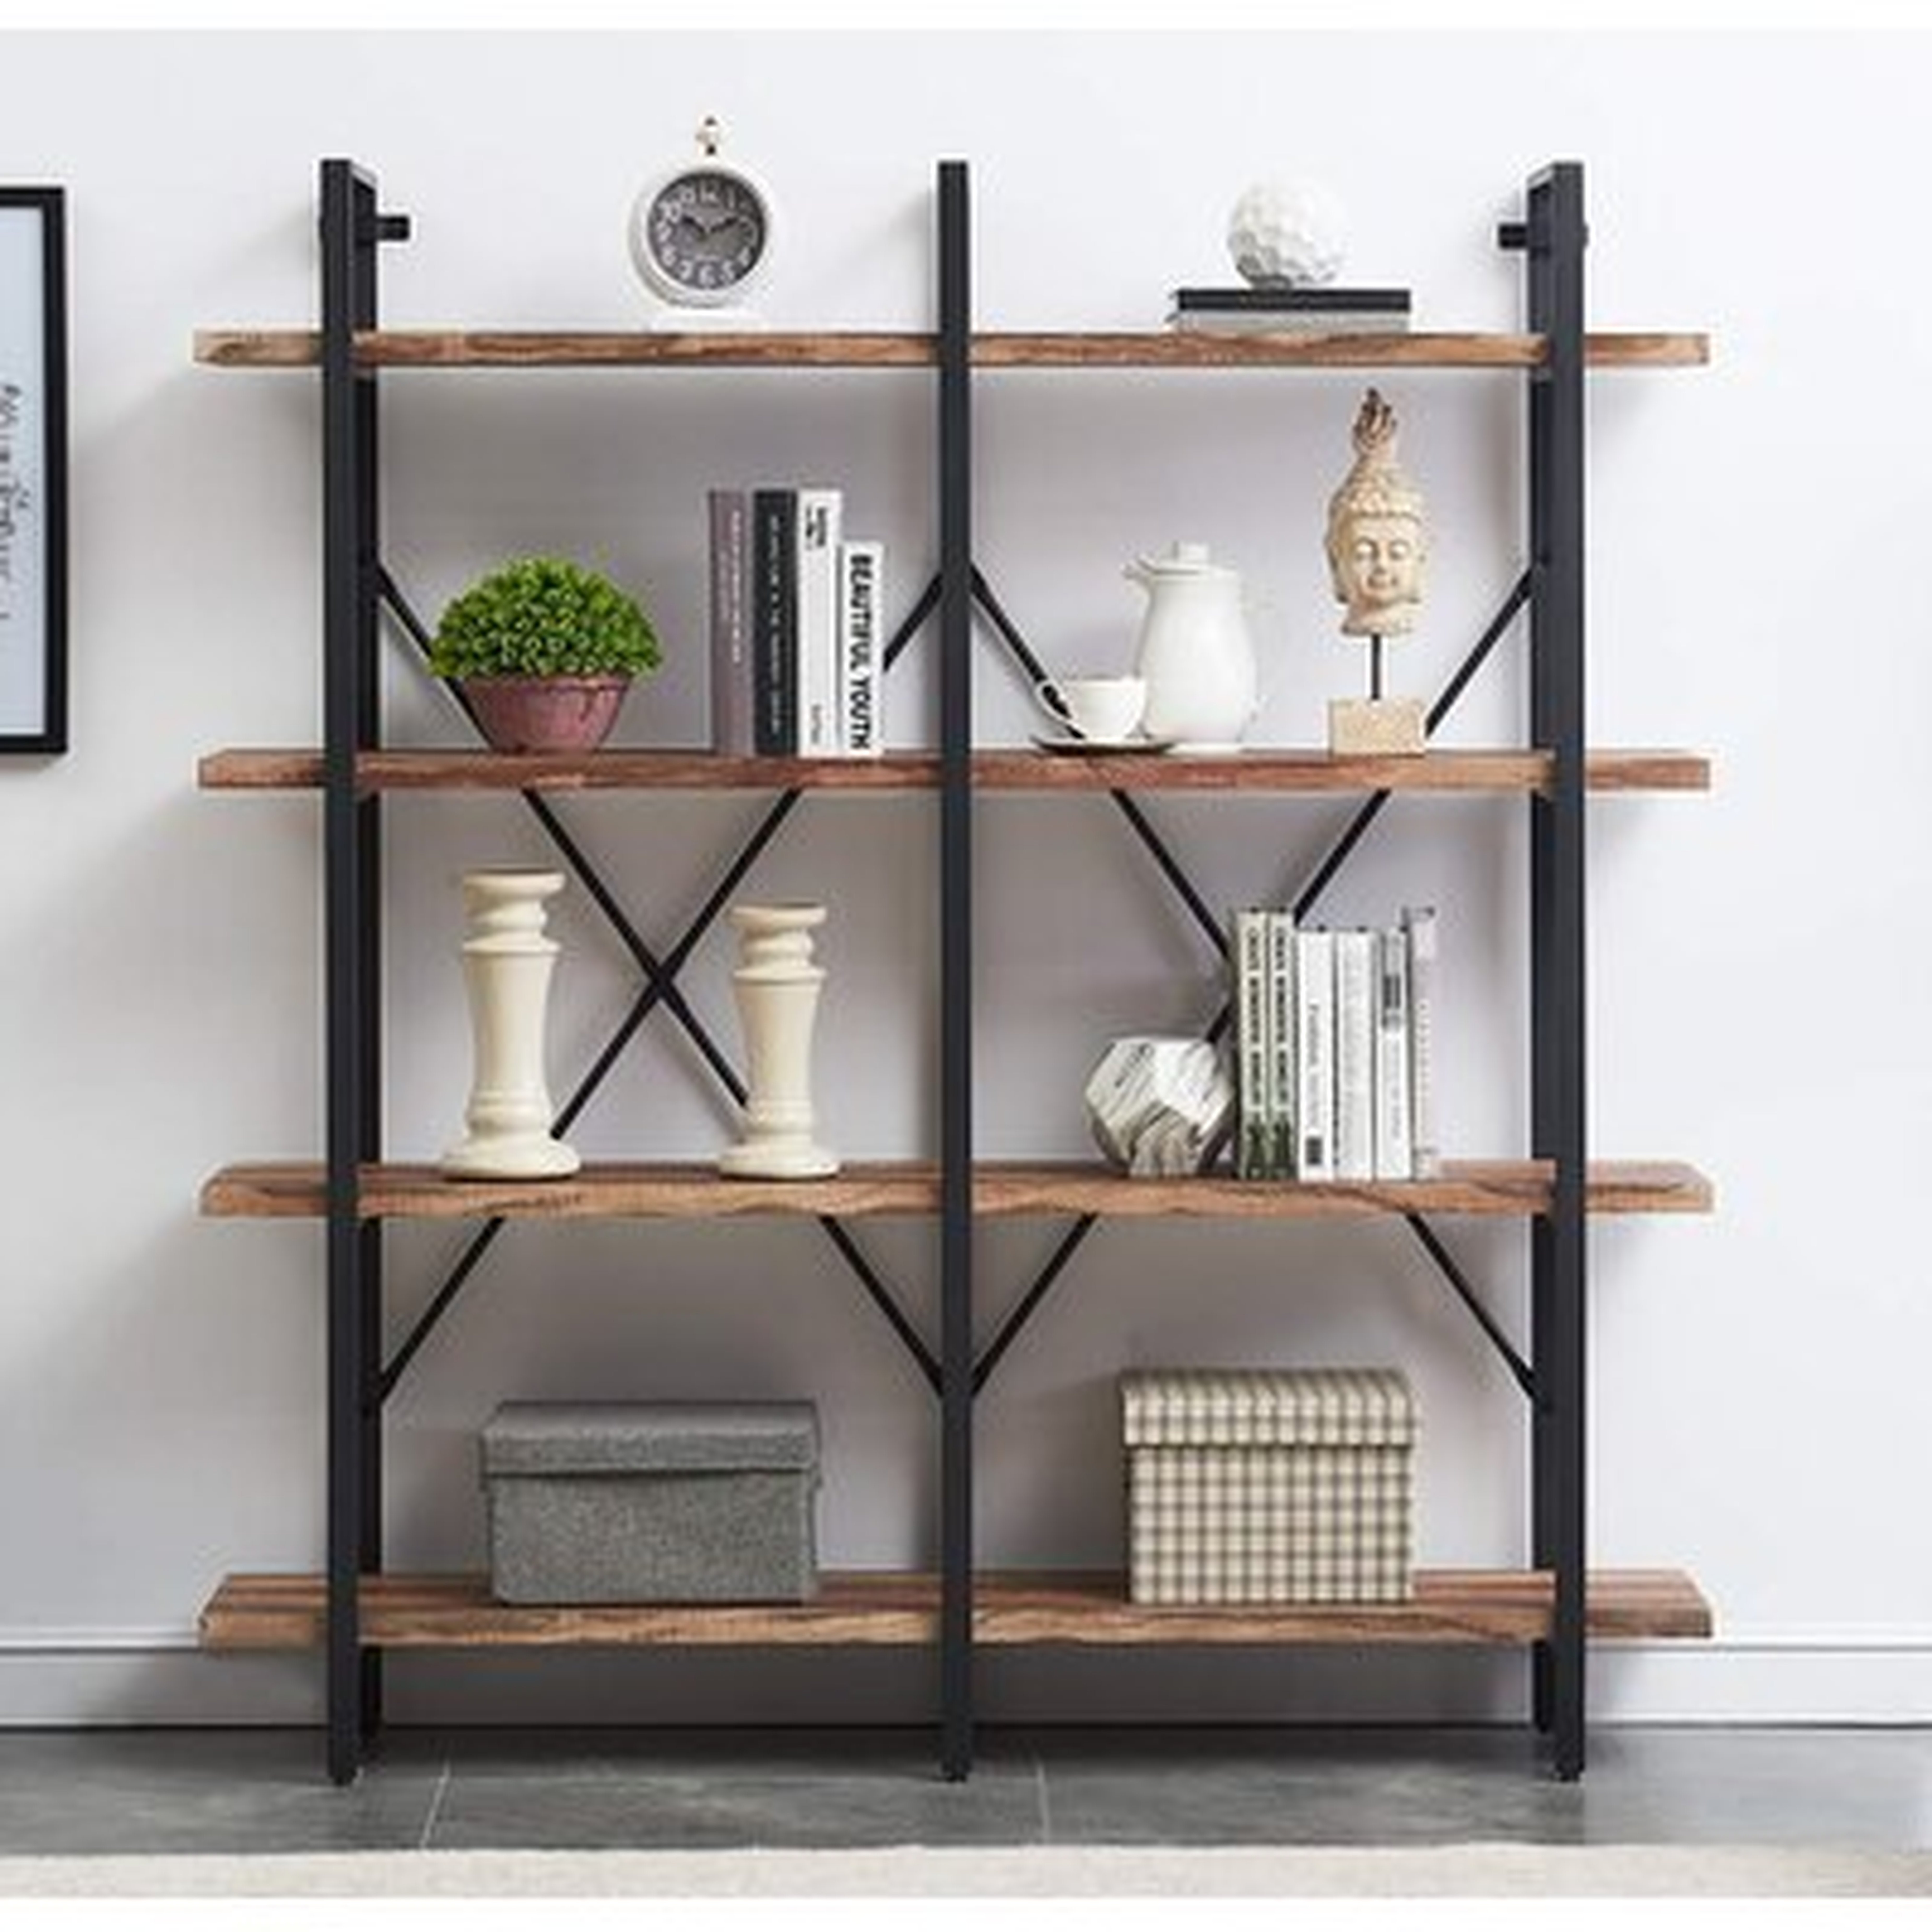 Bookshelf, Double Wide 4-tier Open Bookcase Vintage Industrial Large Shelves, Wood And Metal Etagere Bookshelves, For Home Decor Display, Office Furniture - Wayfair